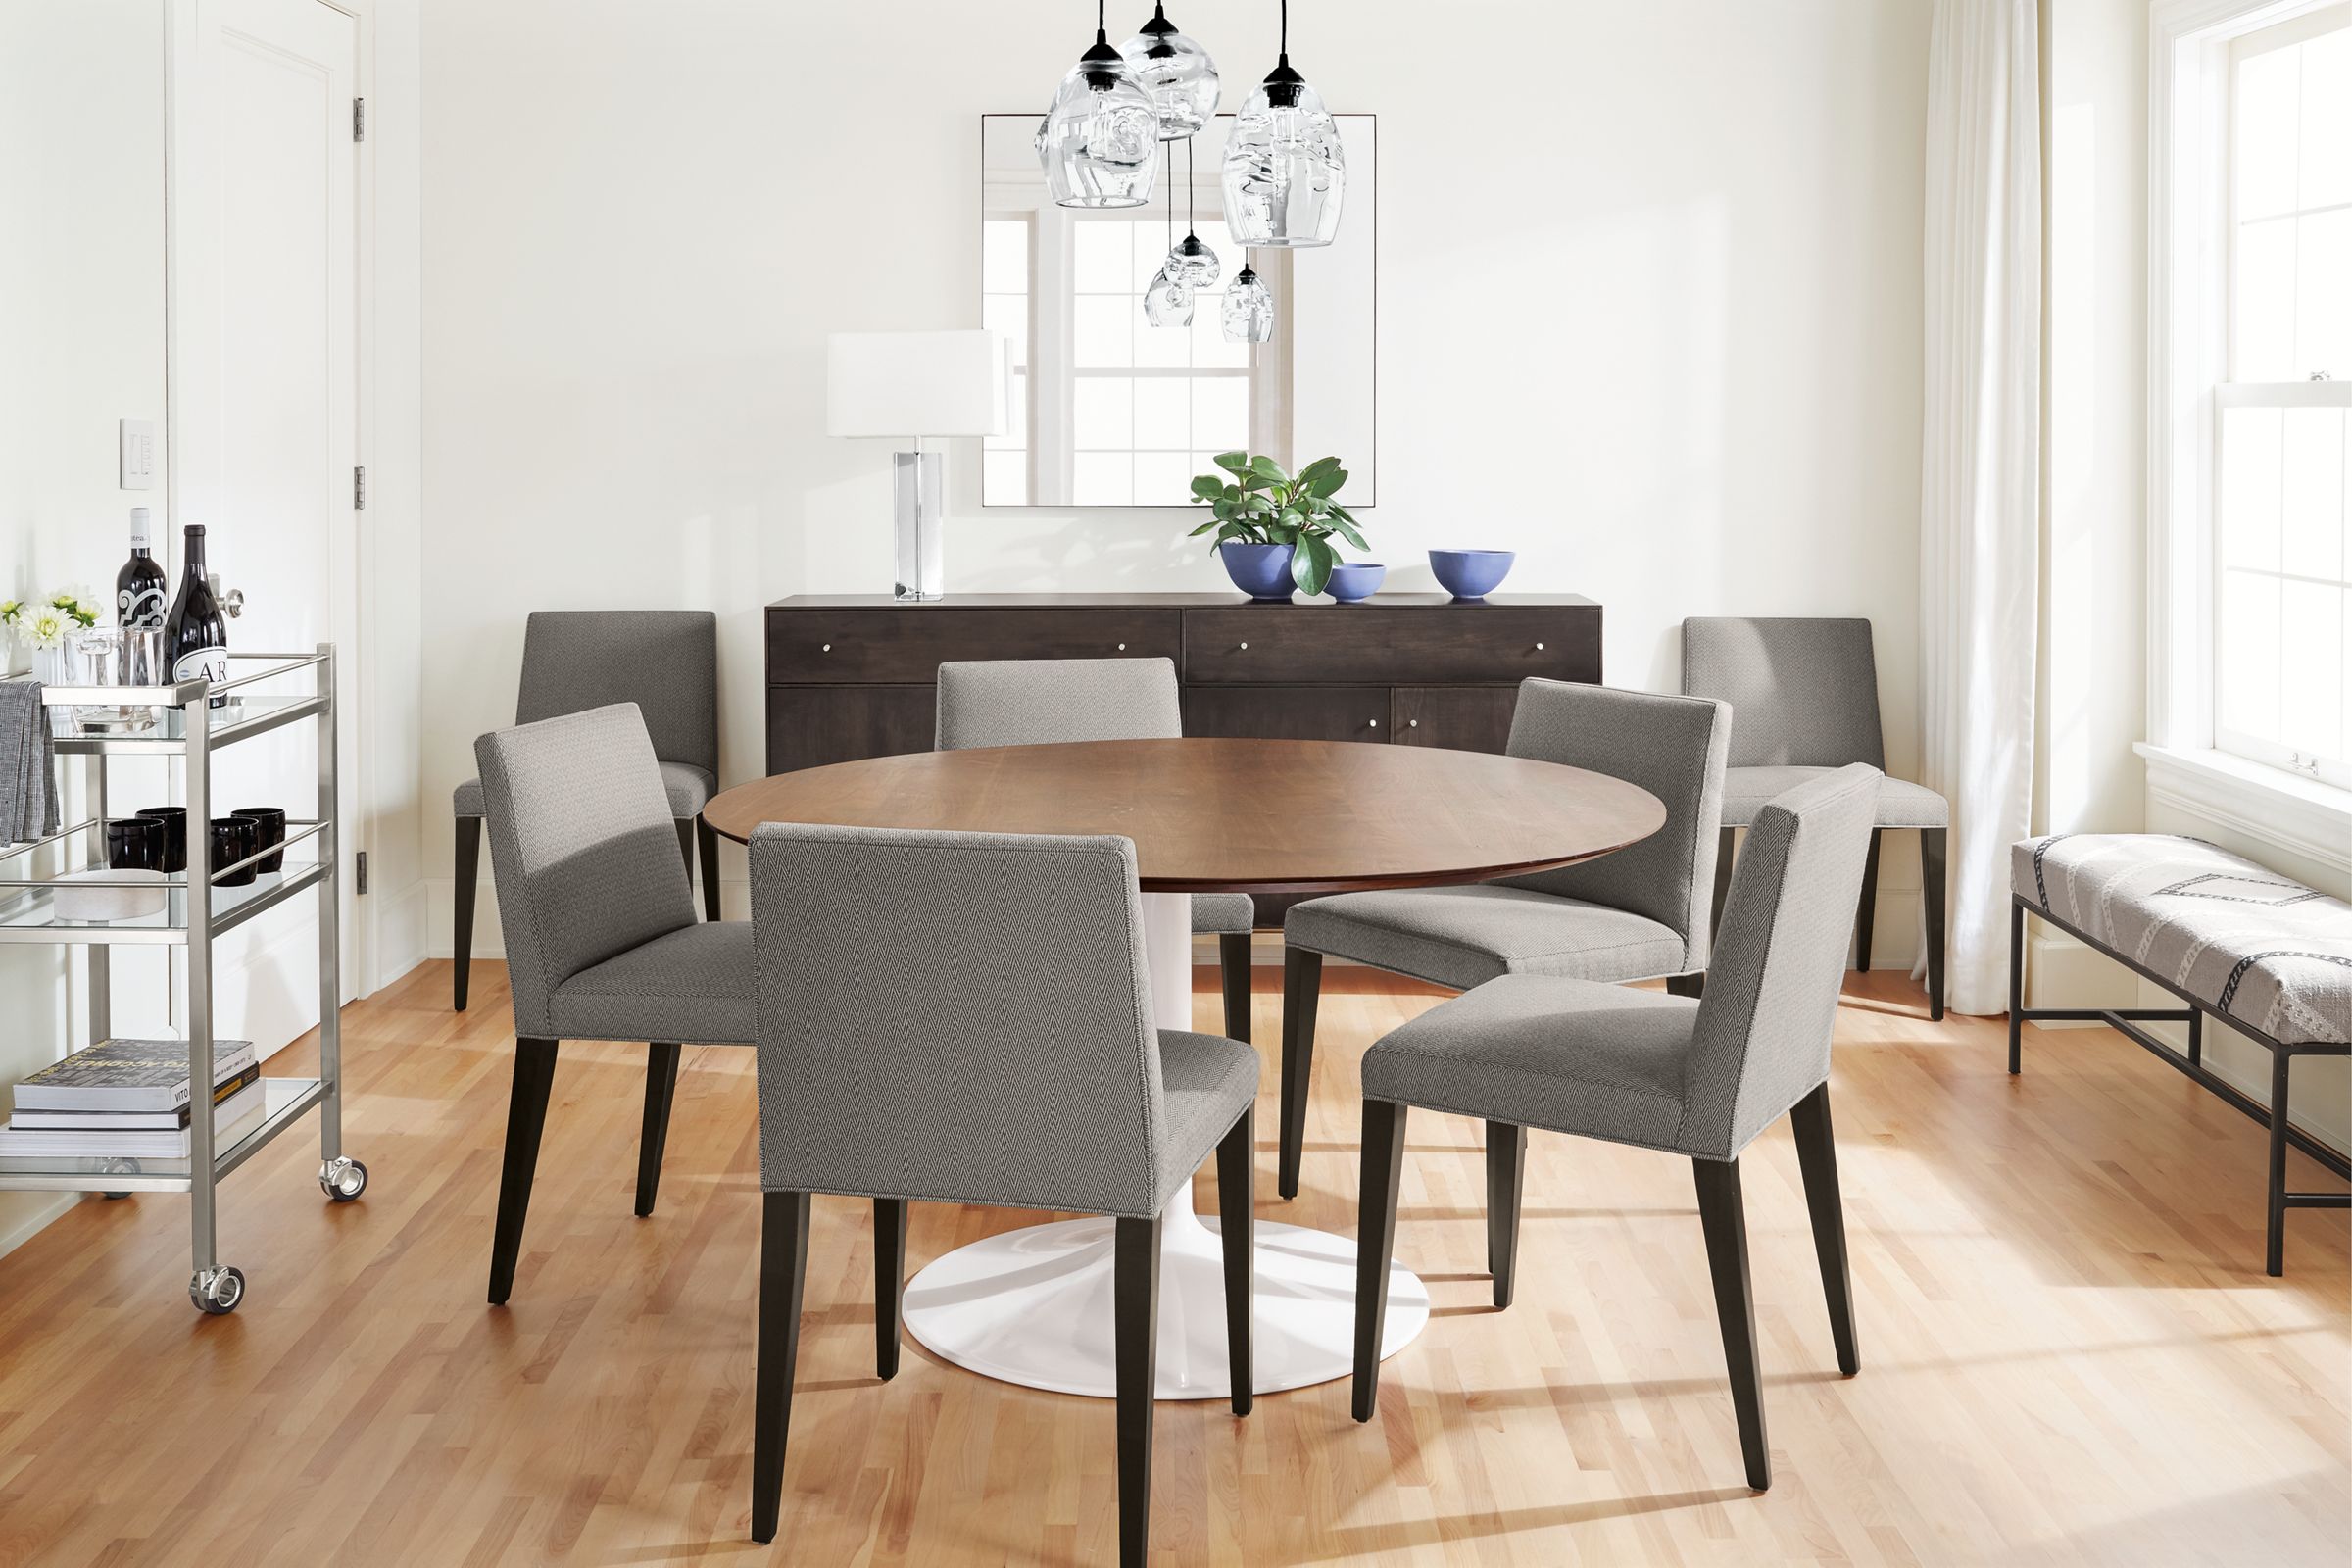 Detail of Aria 54-inch round dining table.